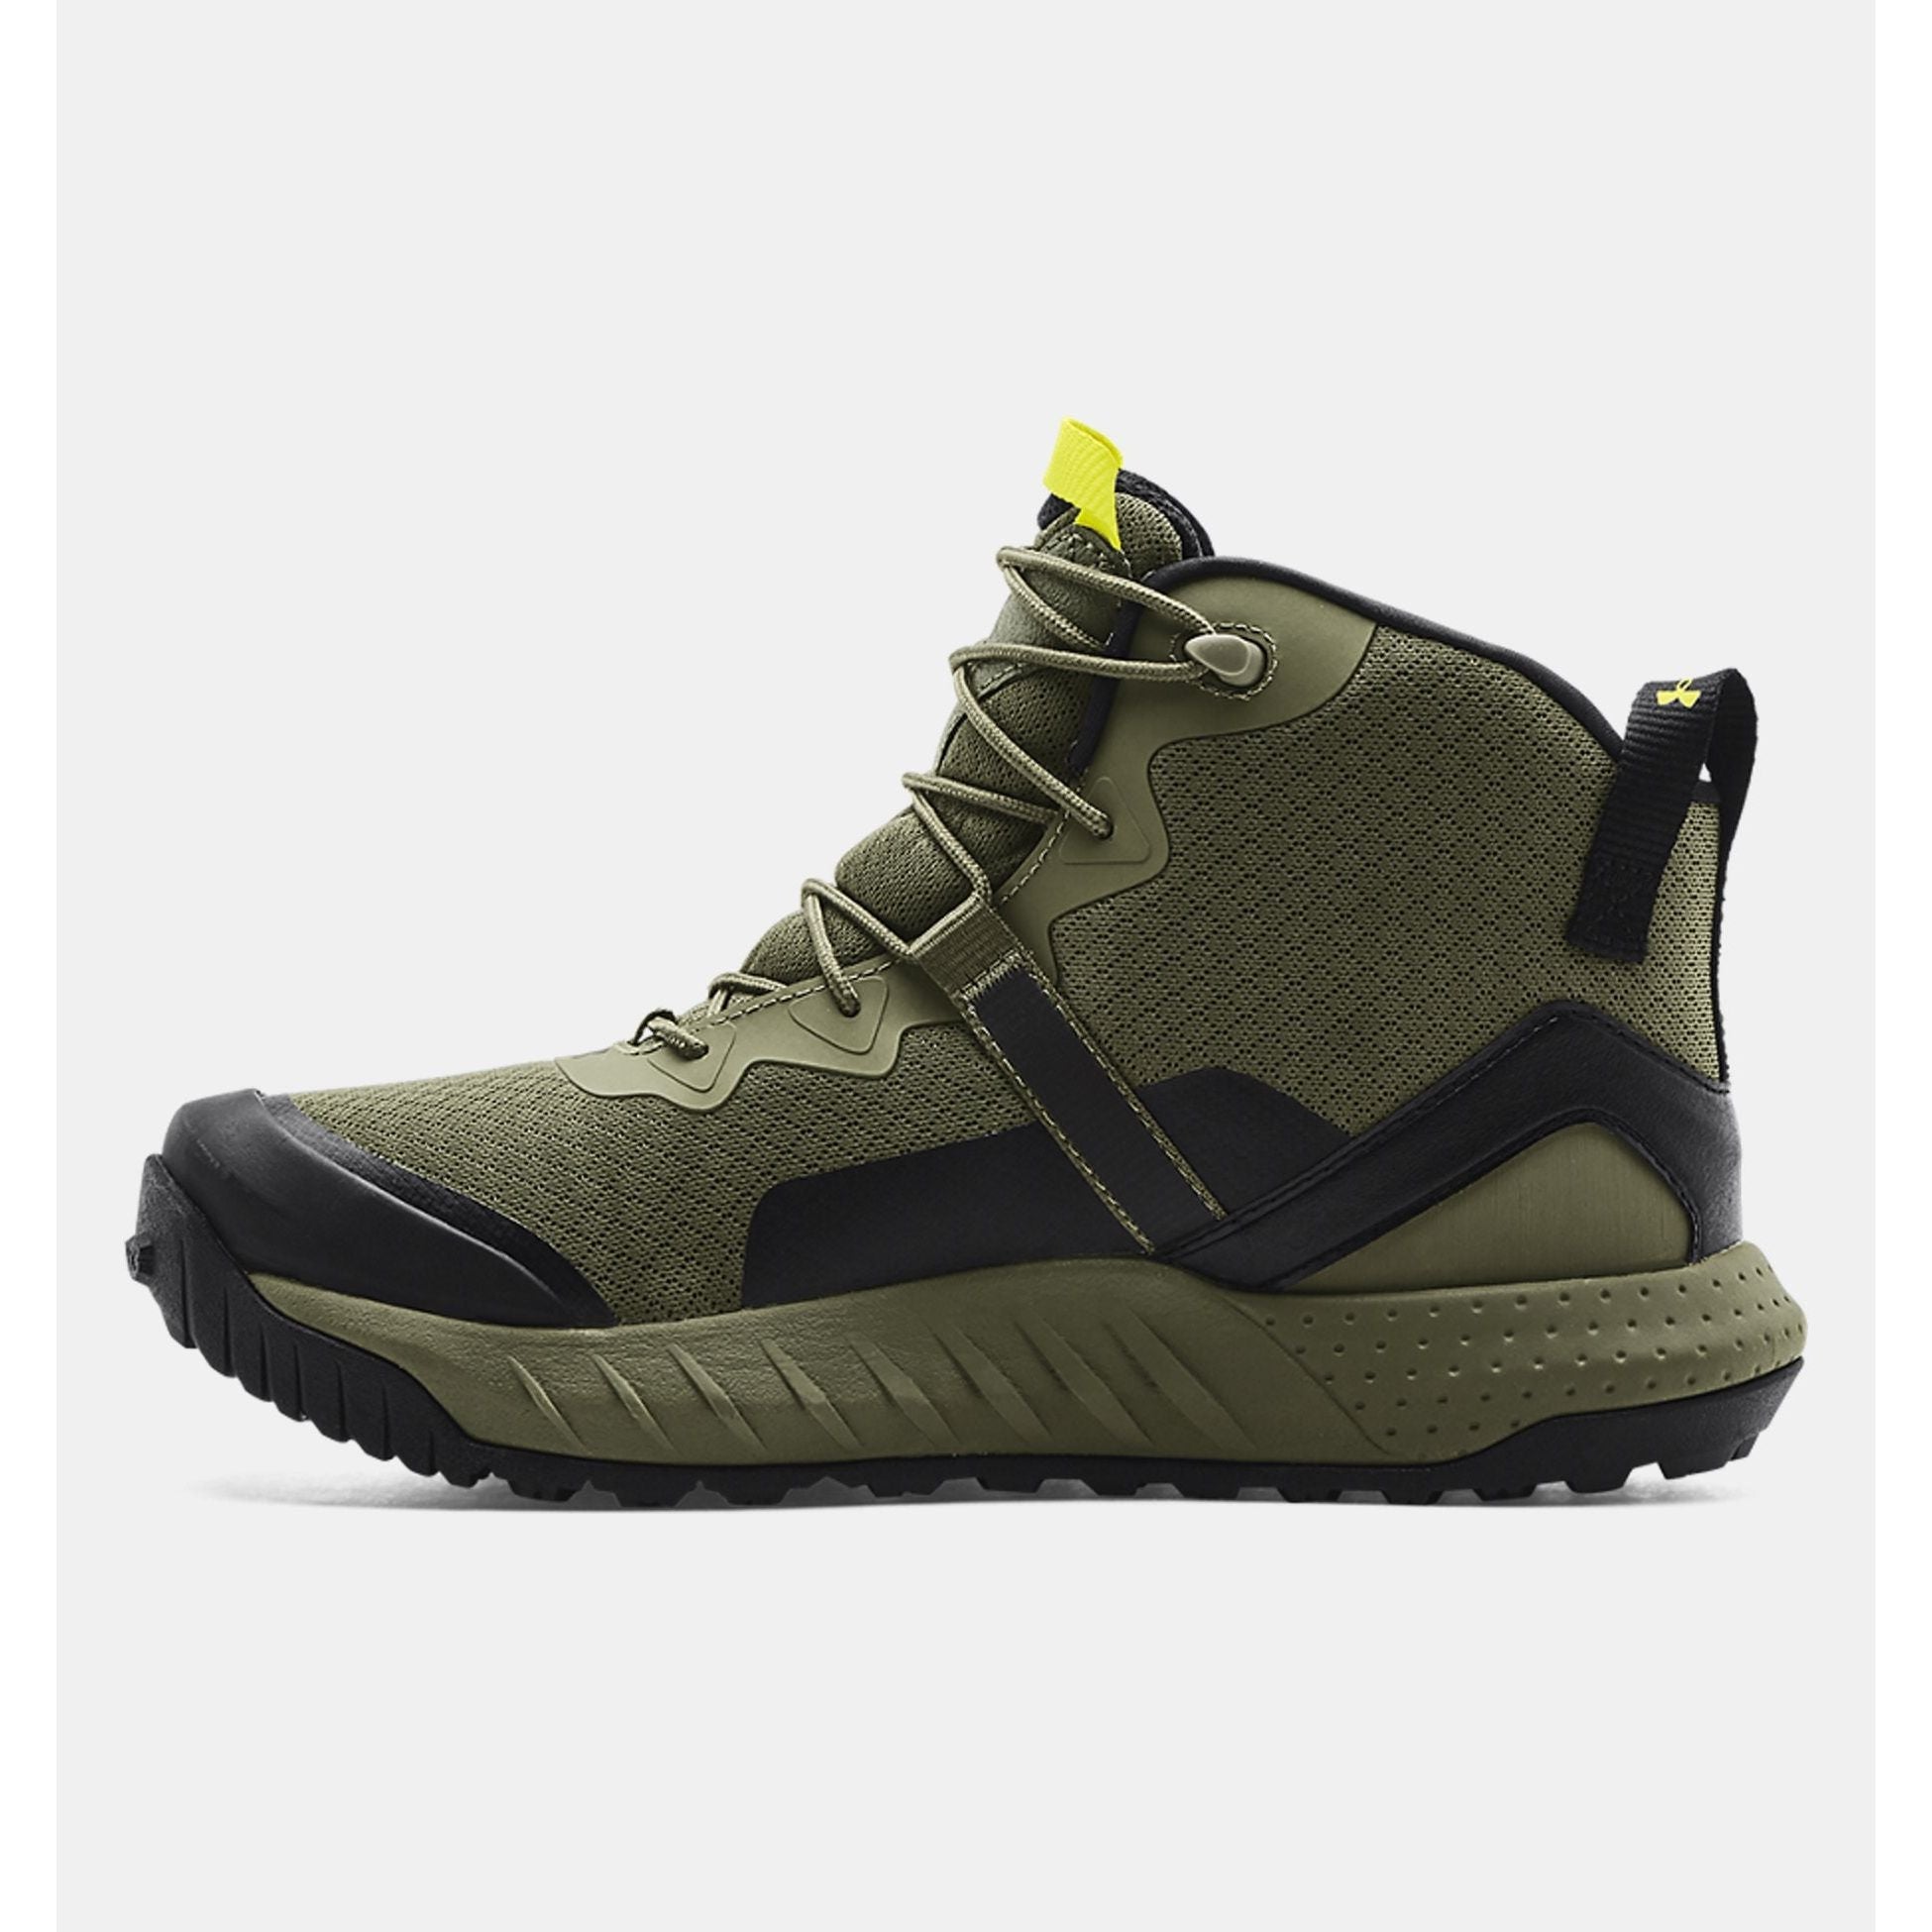 Under Armour Micro G® Valsetz Mid Tactical Boots Marine Green - FULLSEND SKI AND OUTDOOR